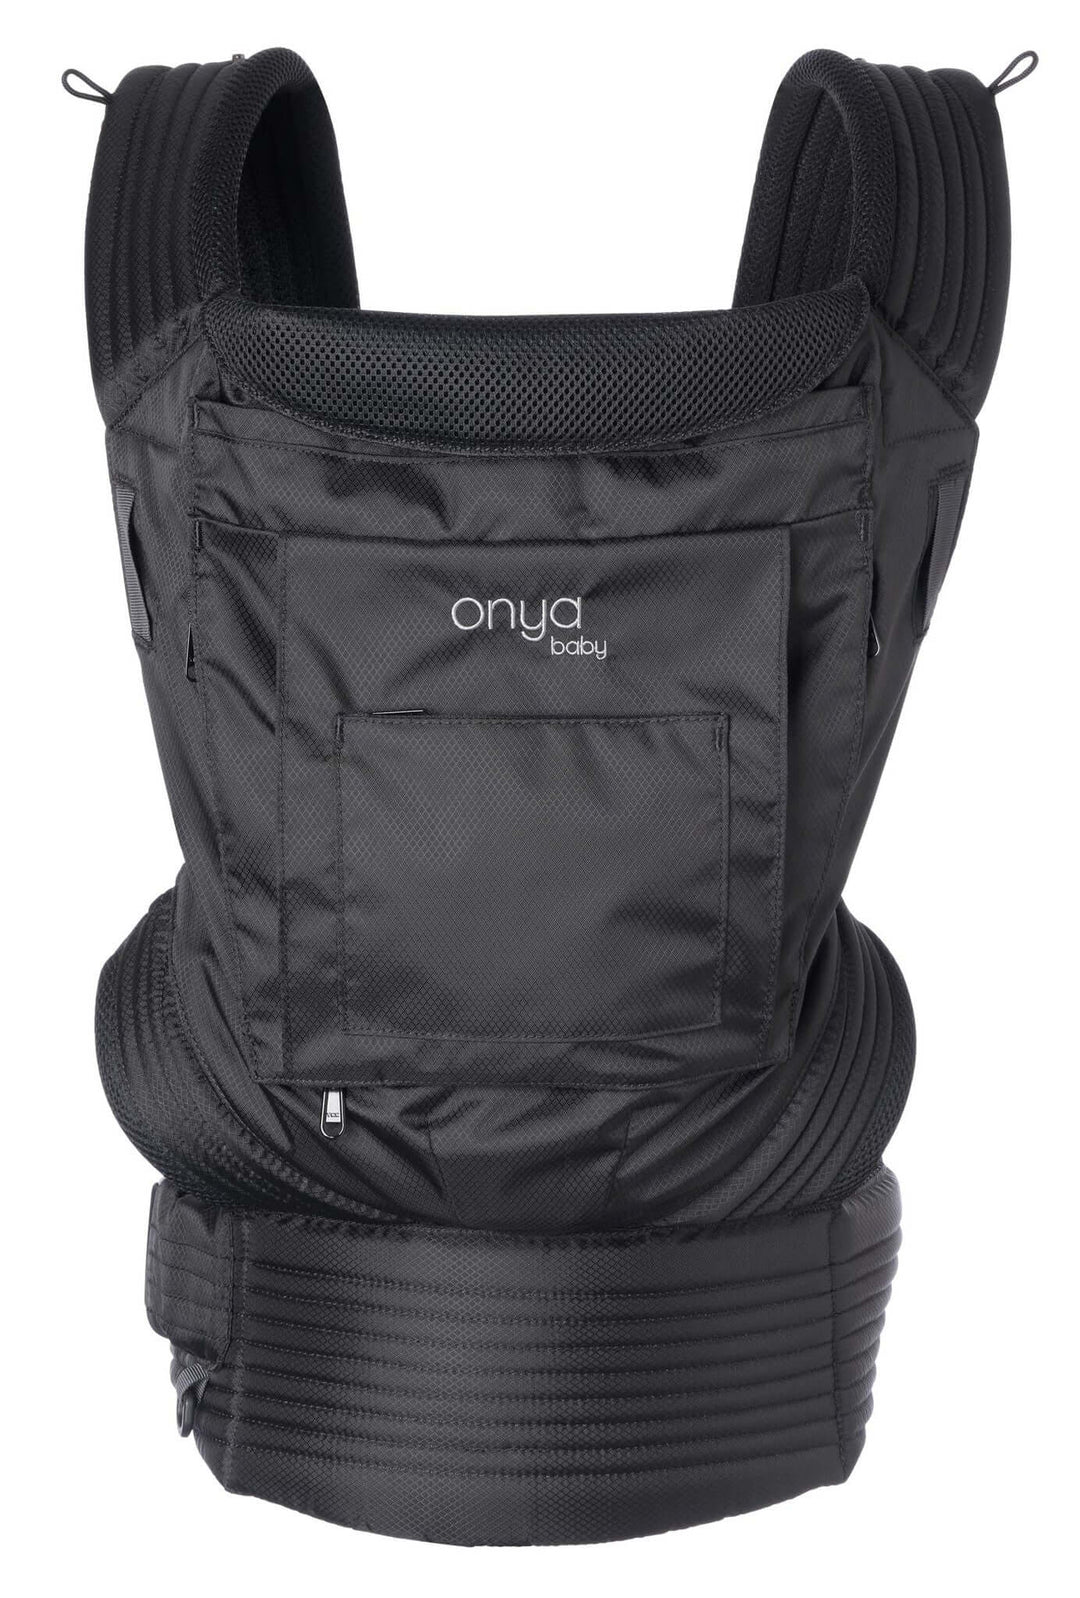 Front View of Black Colored Outback Baby Carrier by Onya Baby